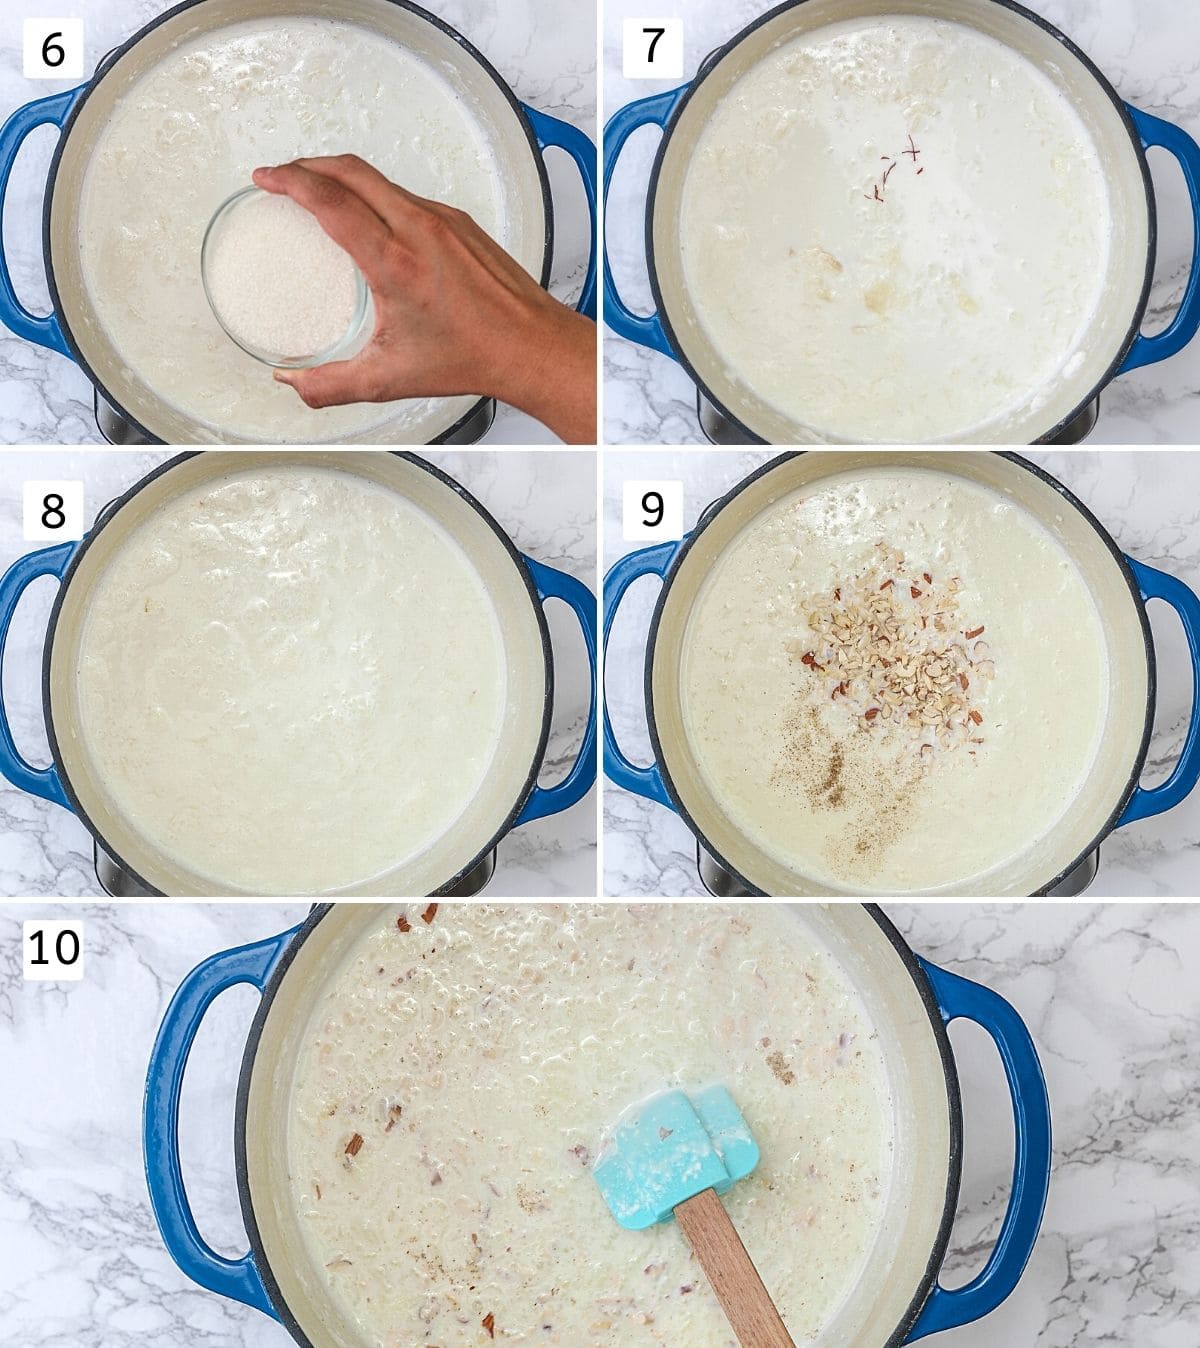 Collage of 5 steps showing adding sugar, saffron and nuts into the simmering kheer.